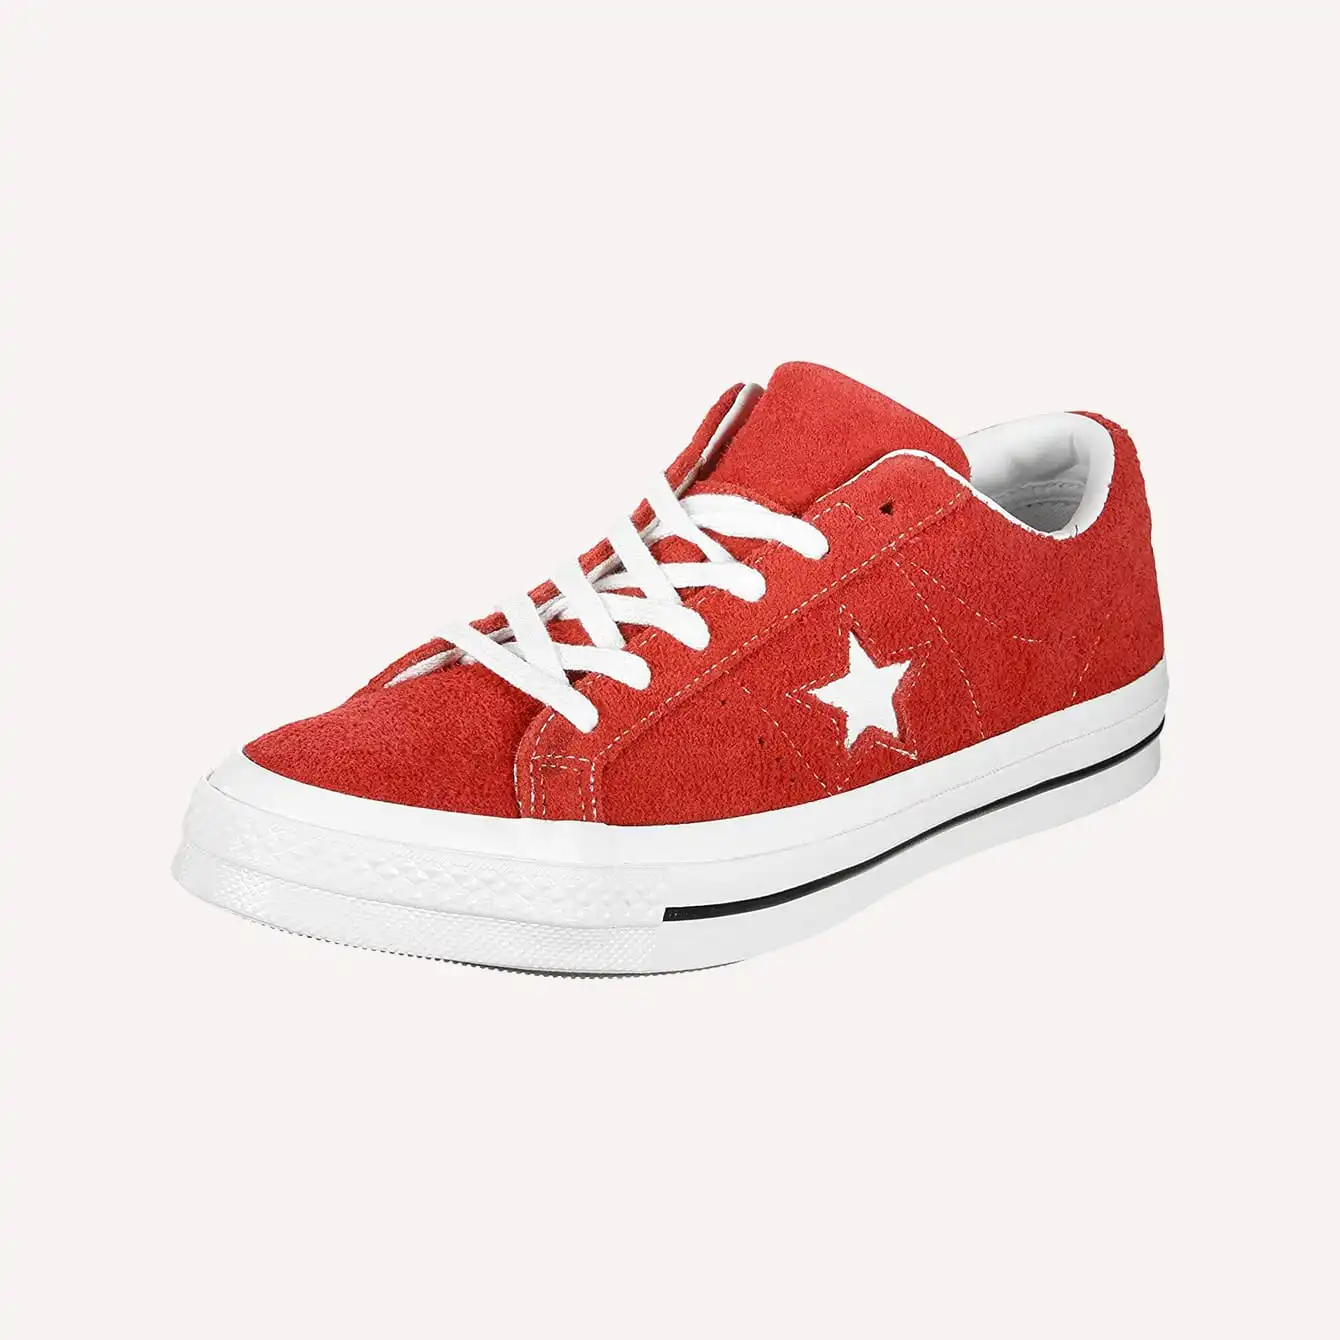 Converse - Men's One Star Suede Sneakers